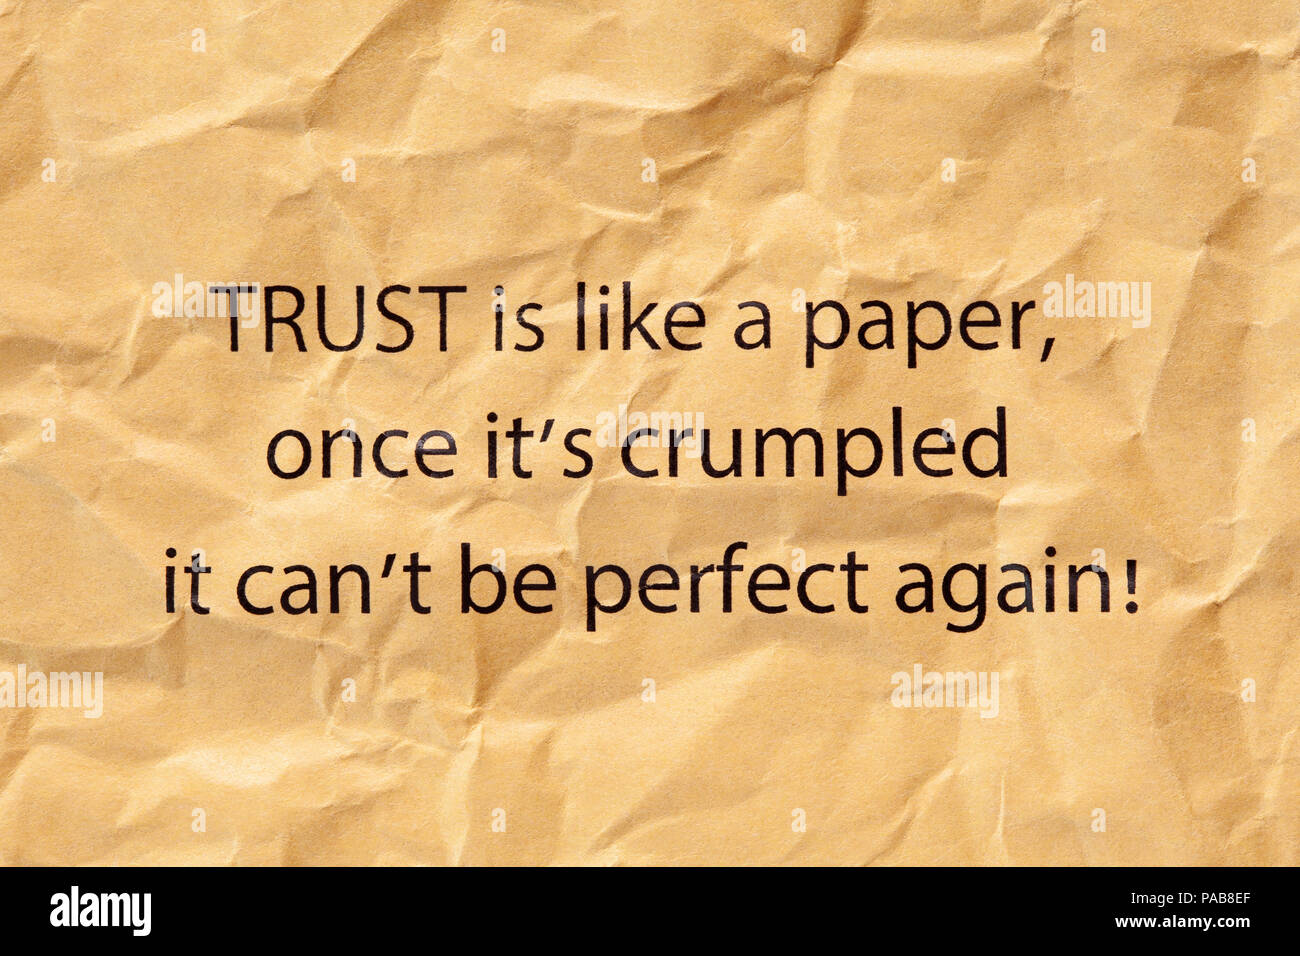 Quote Trust is like a paper, once it's crumpled it can't be perfect again printed on crumpled brown paper. Stock Photo